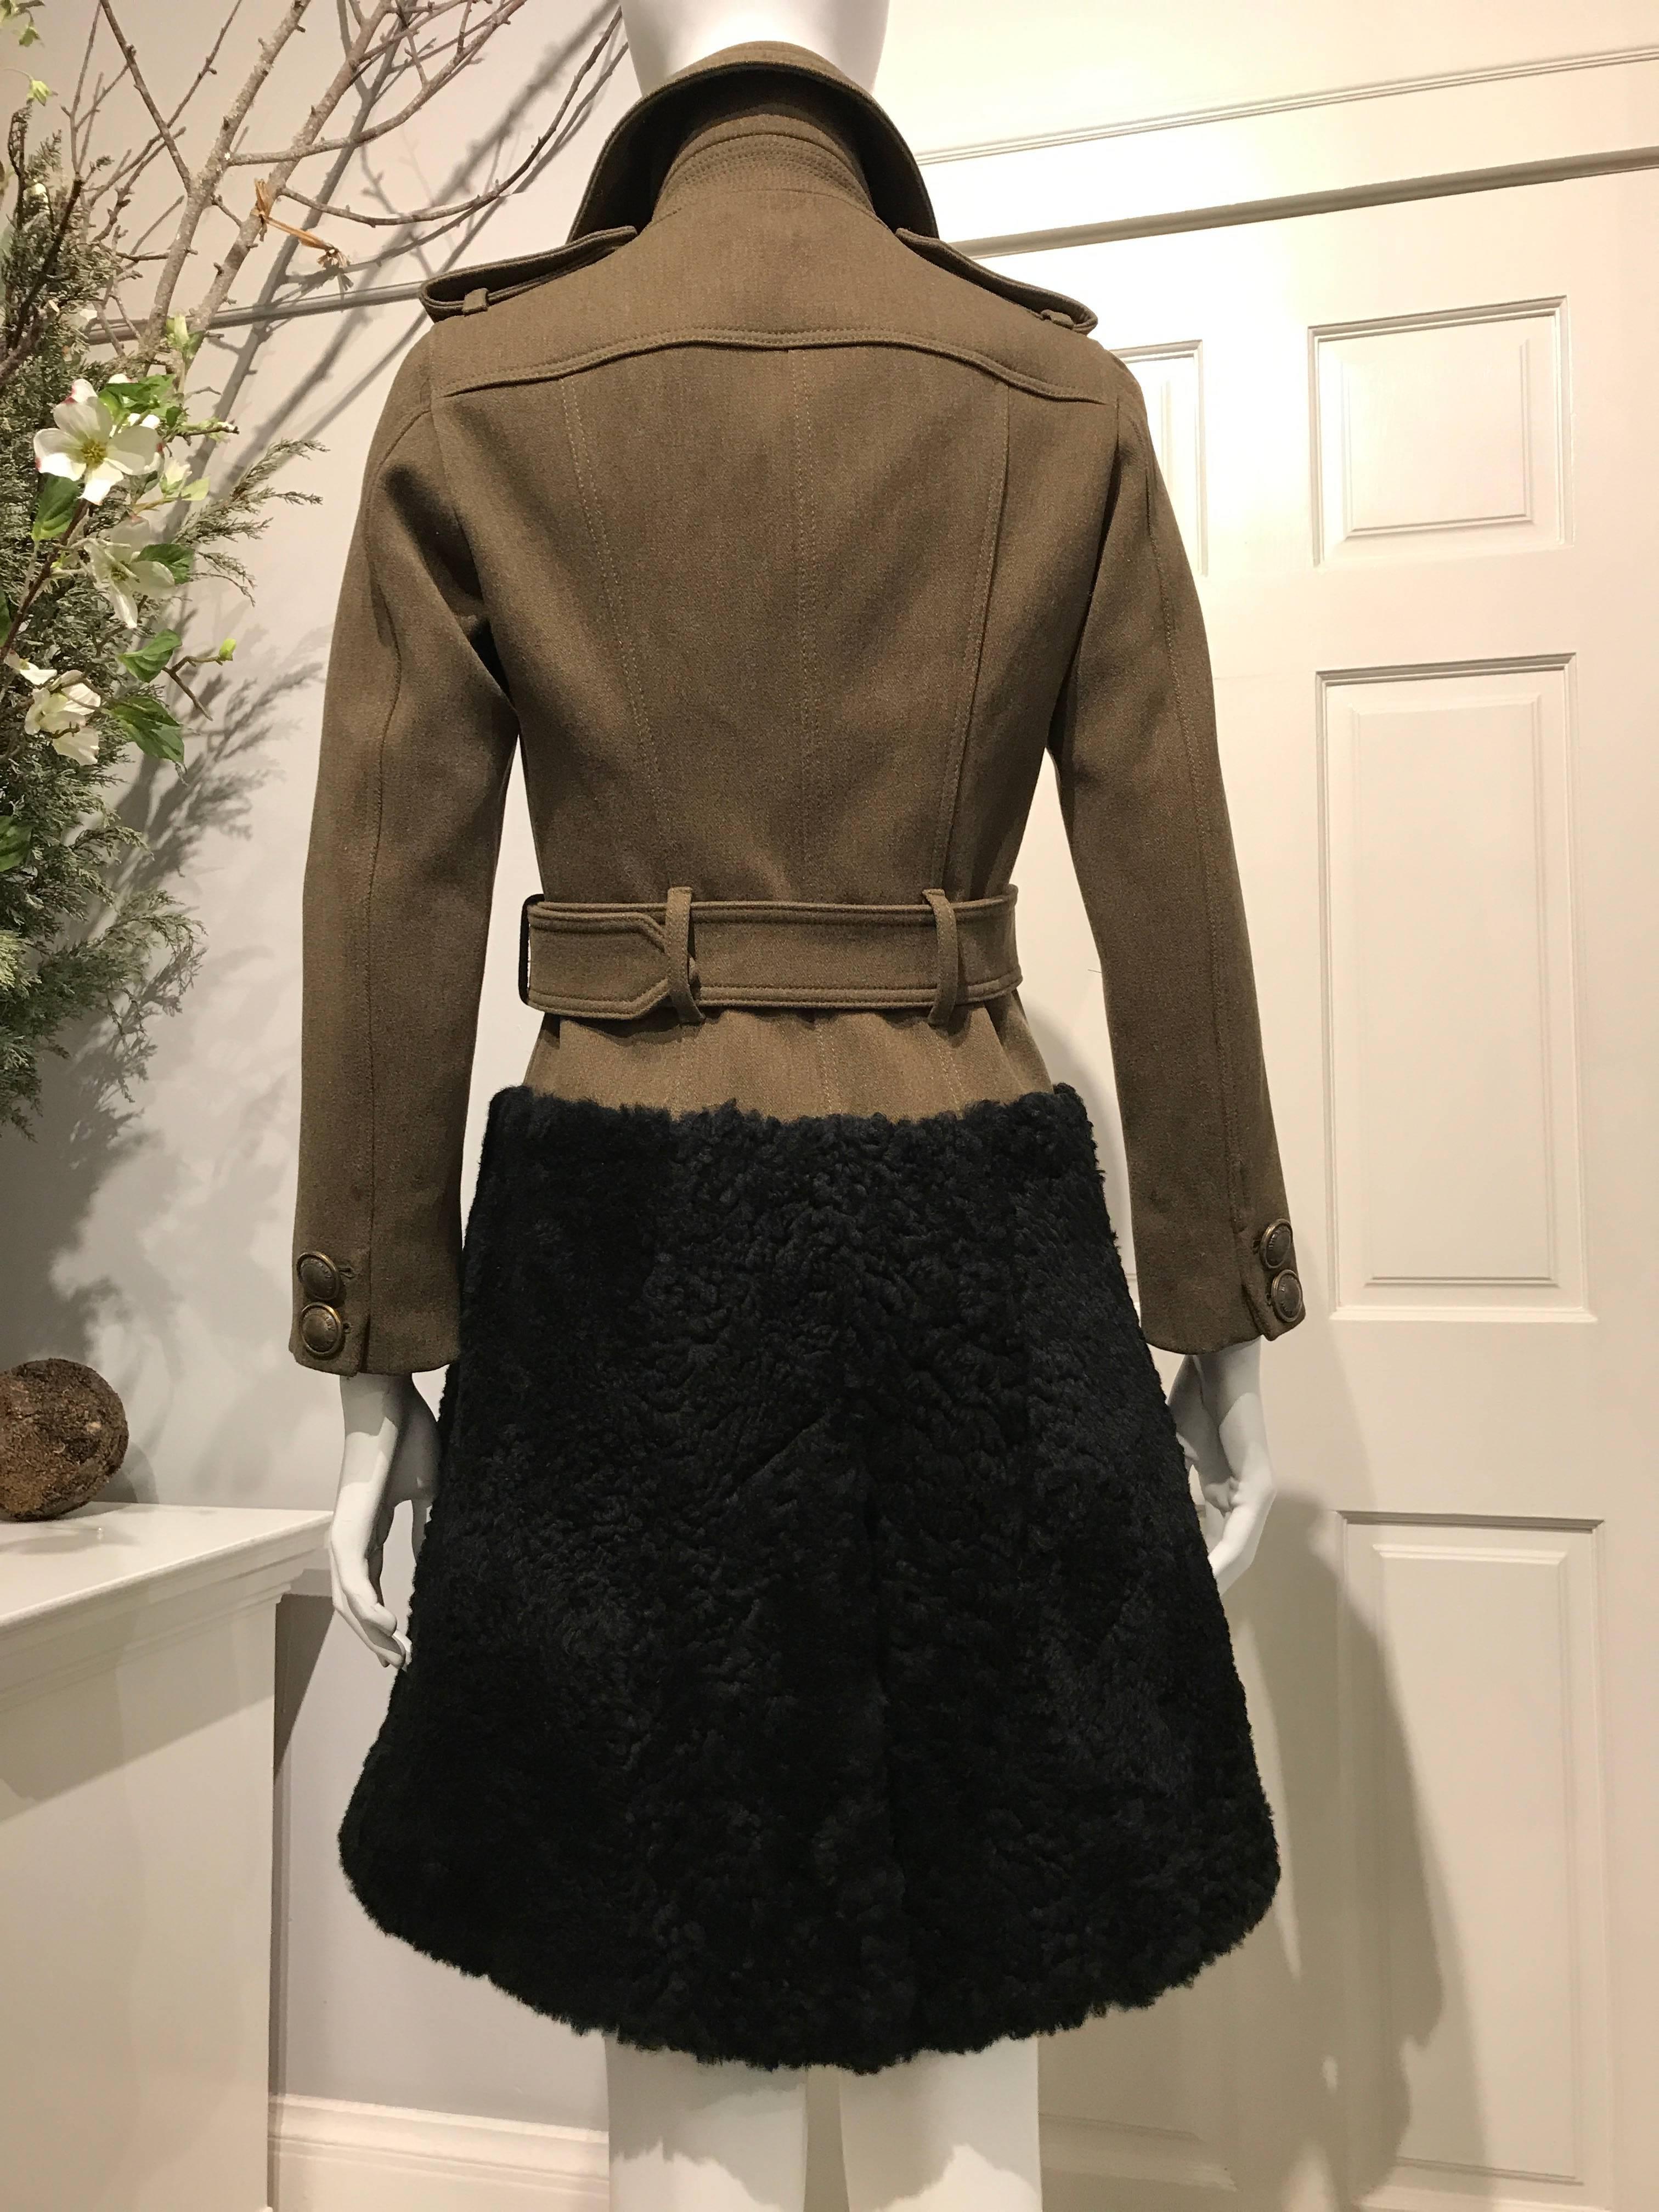 Burberry Prorsum Army Green Wool Coat With Black Shearling Skirt Sz 38 (Us2) In Excellent Condition For Sale In San Francisco, CA